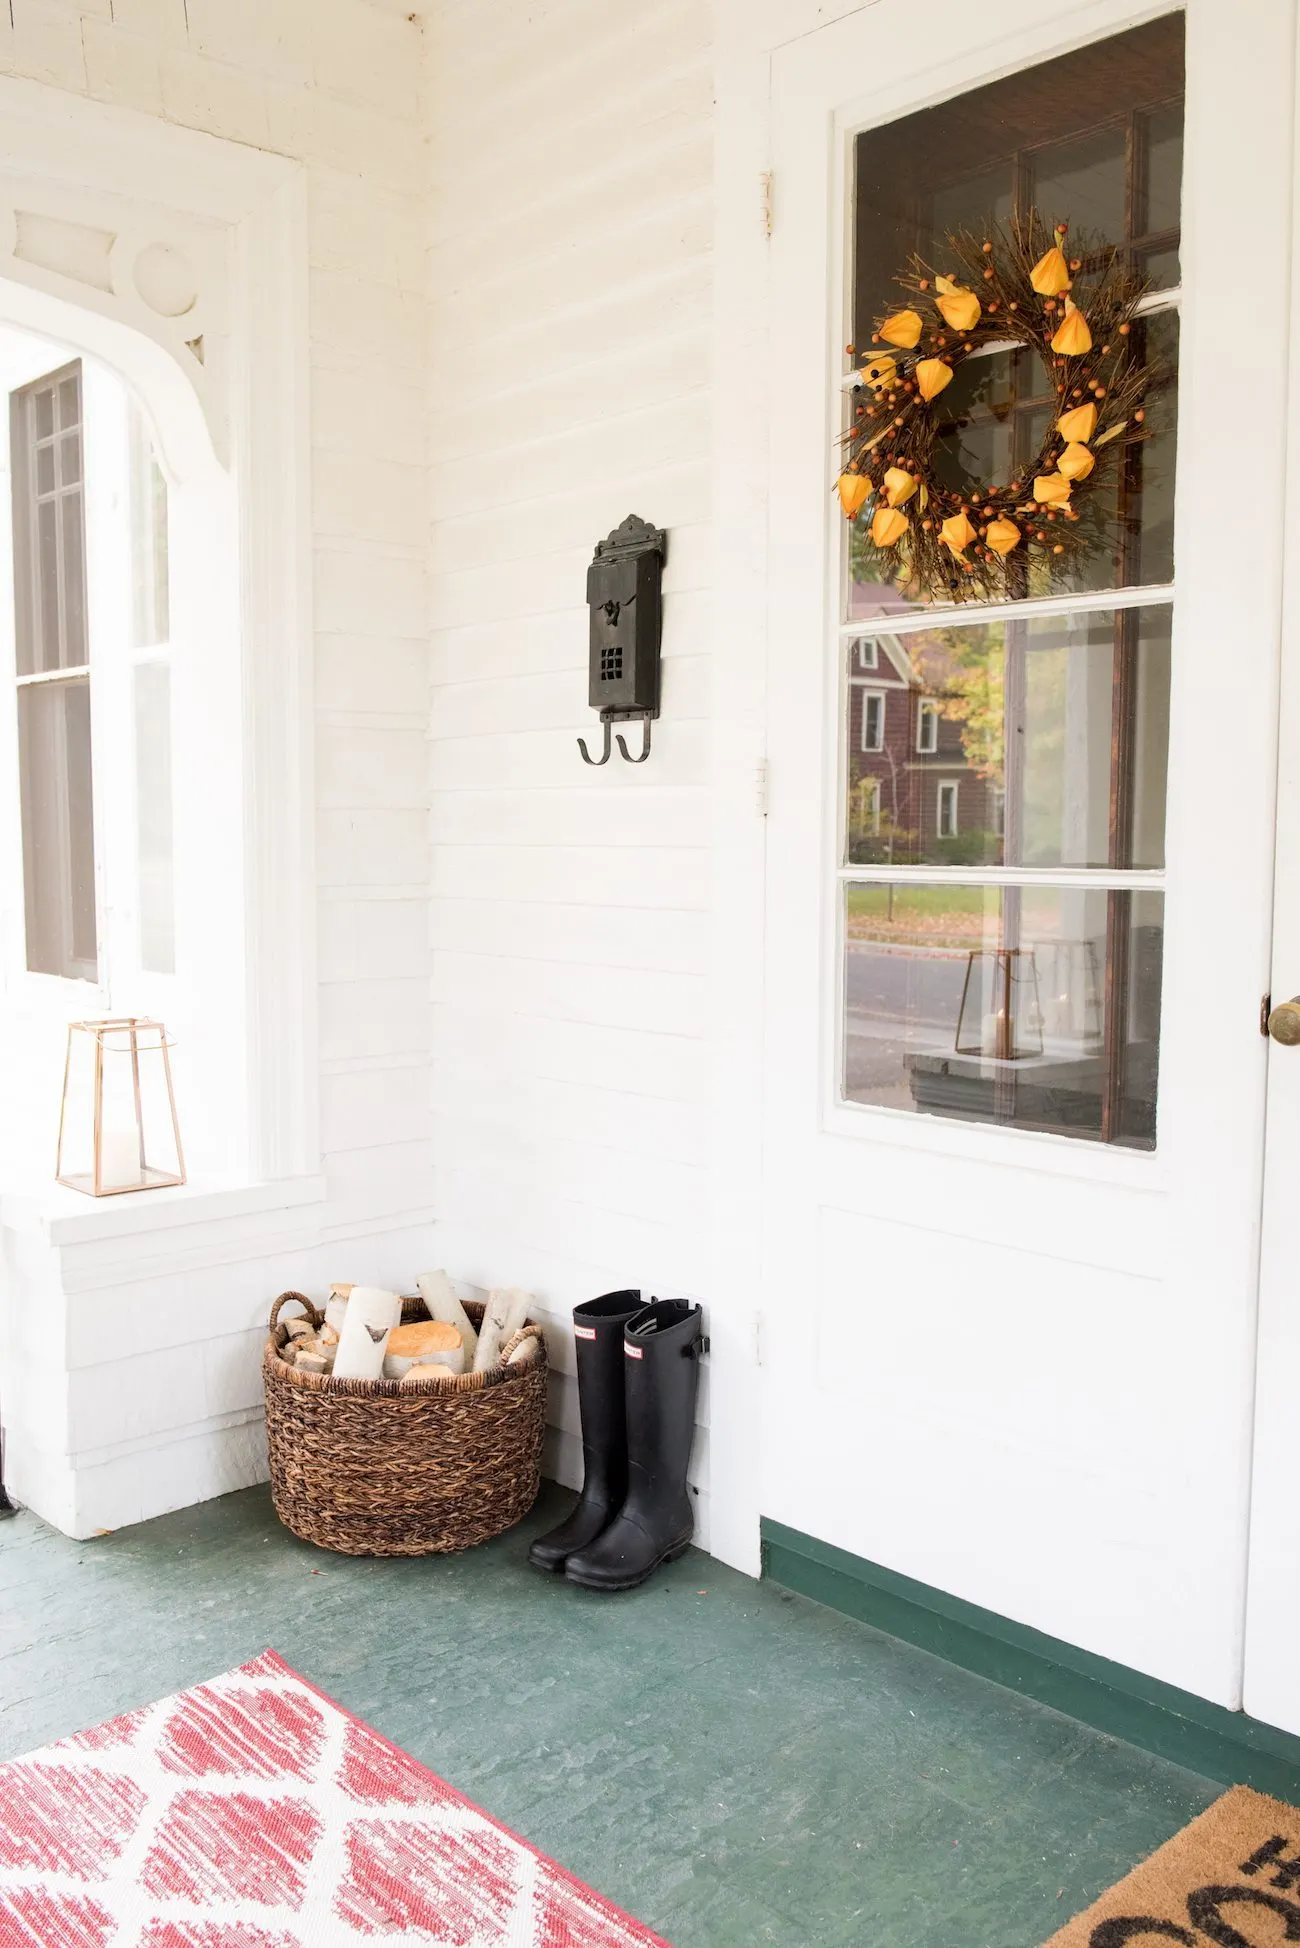 Our Fall Front Porch Decor | Fall decorating ideas, entertaining tips, party ideas and more from @cydconverse